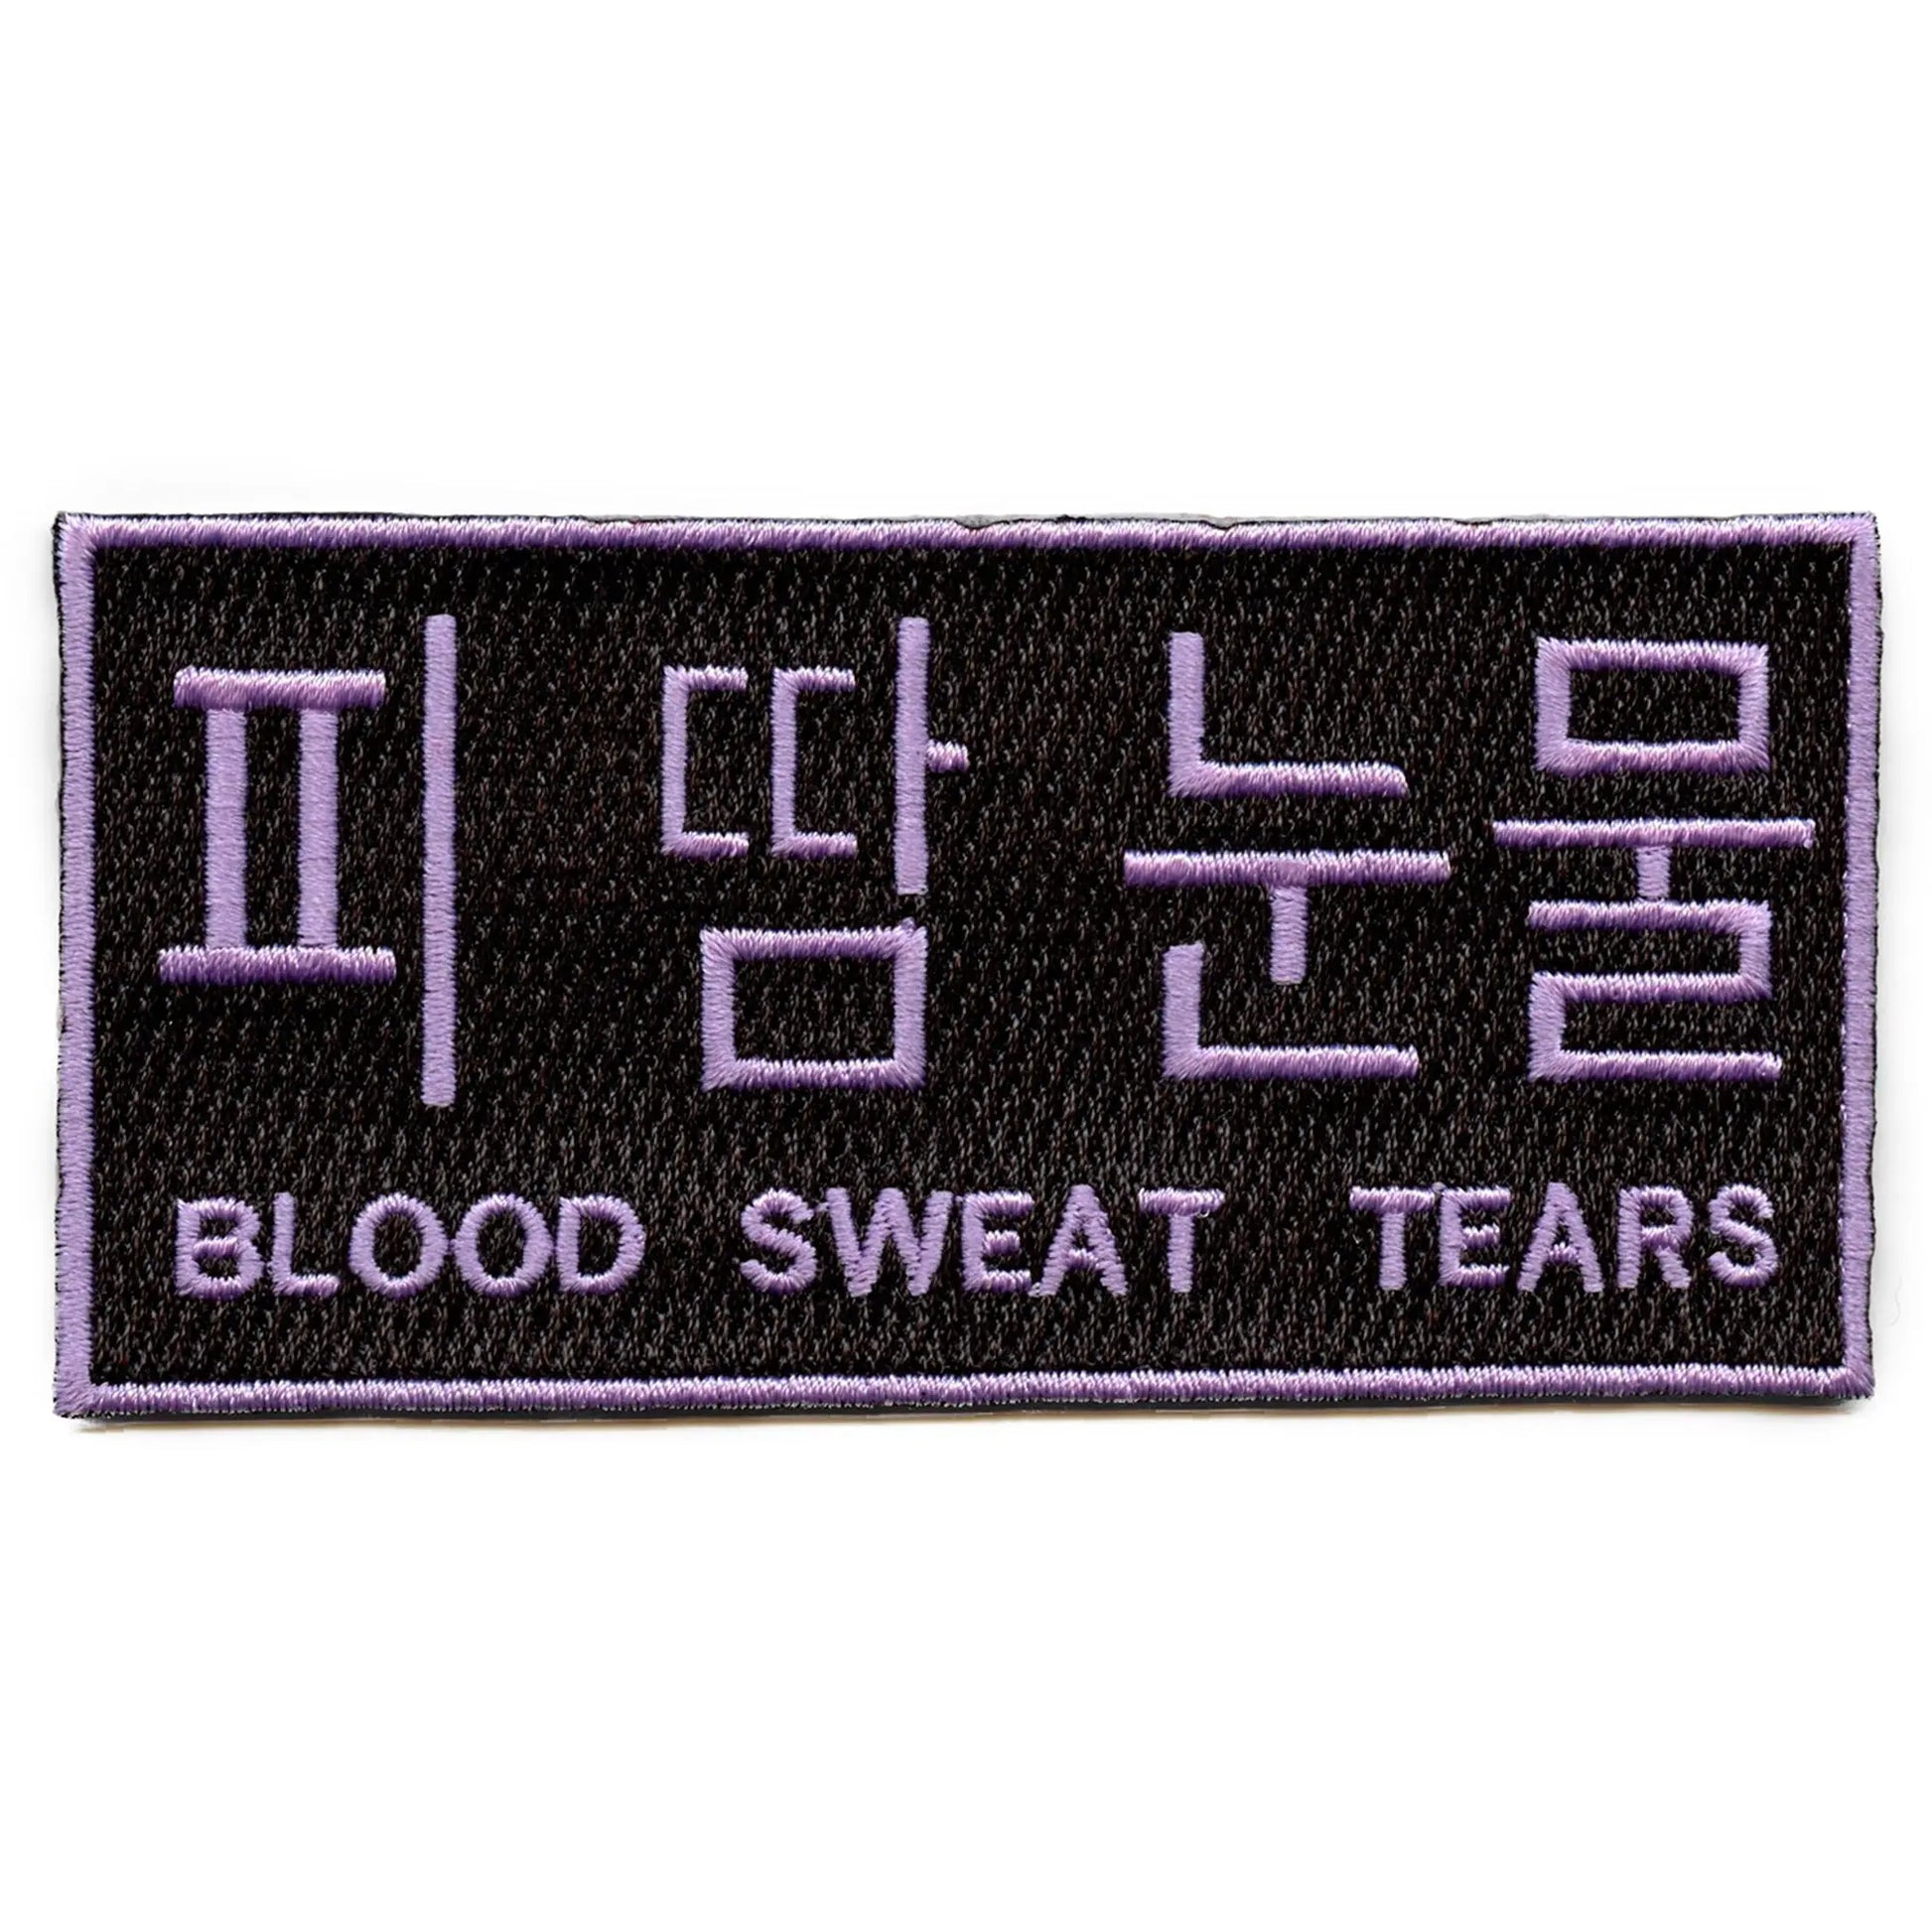 Blood Sweat Tears Patch KPOP Song Embroidered Iron O 